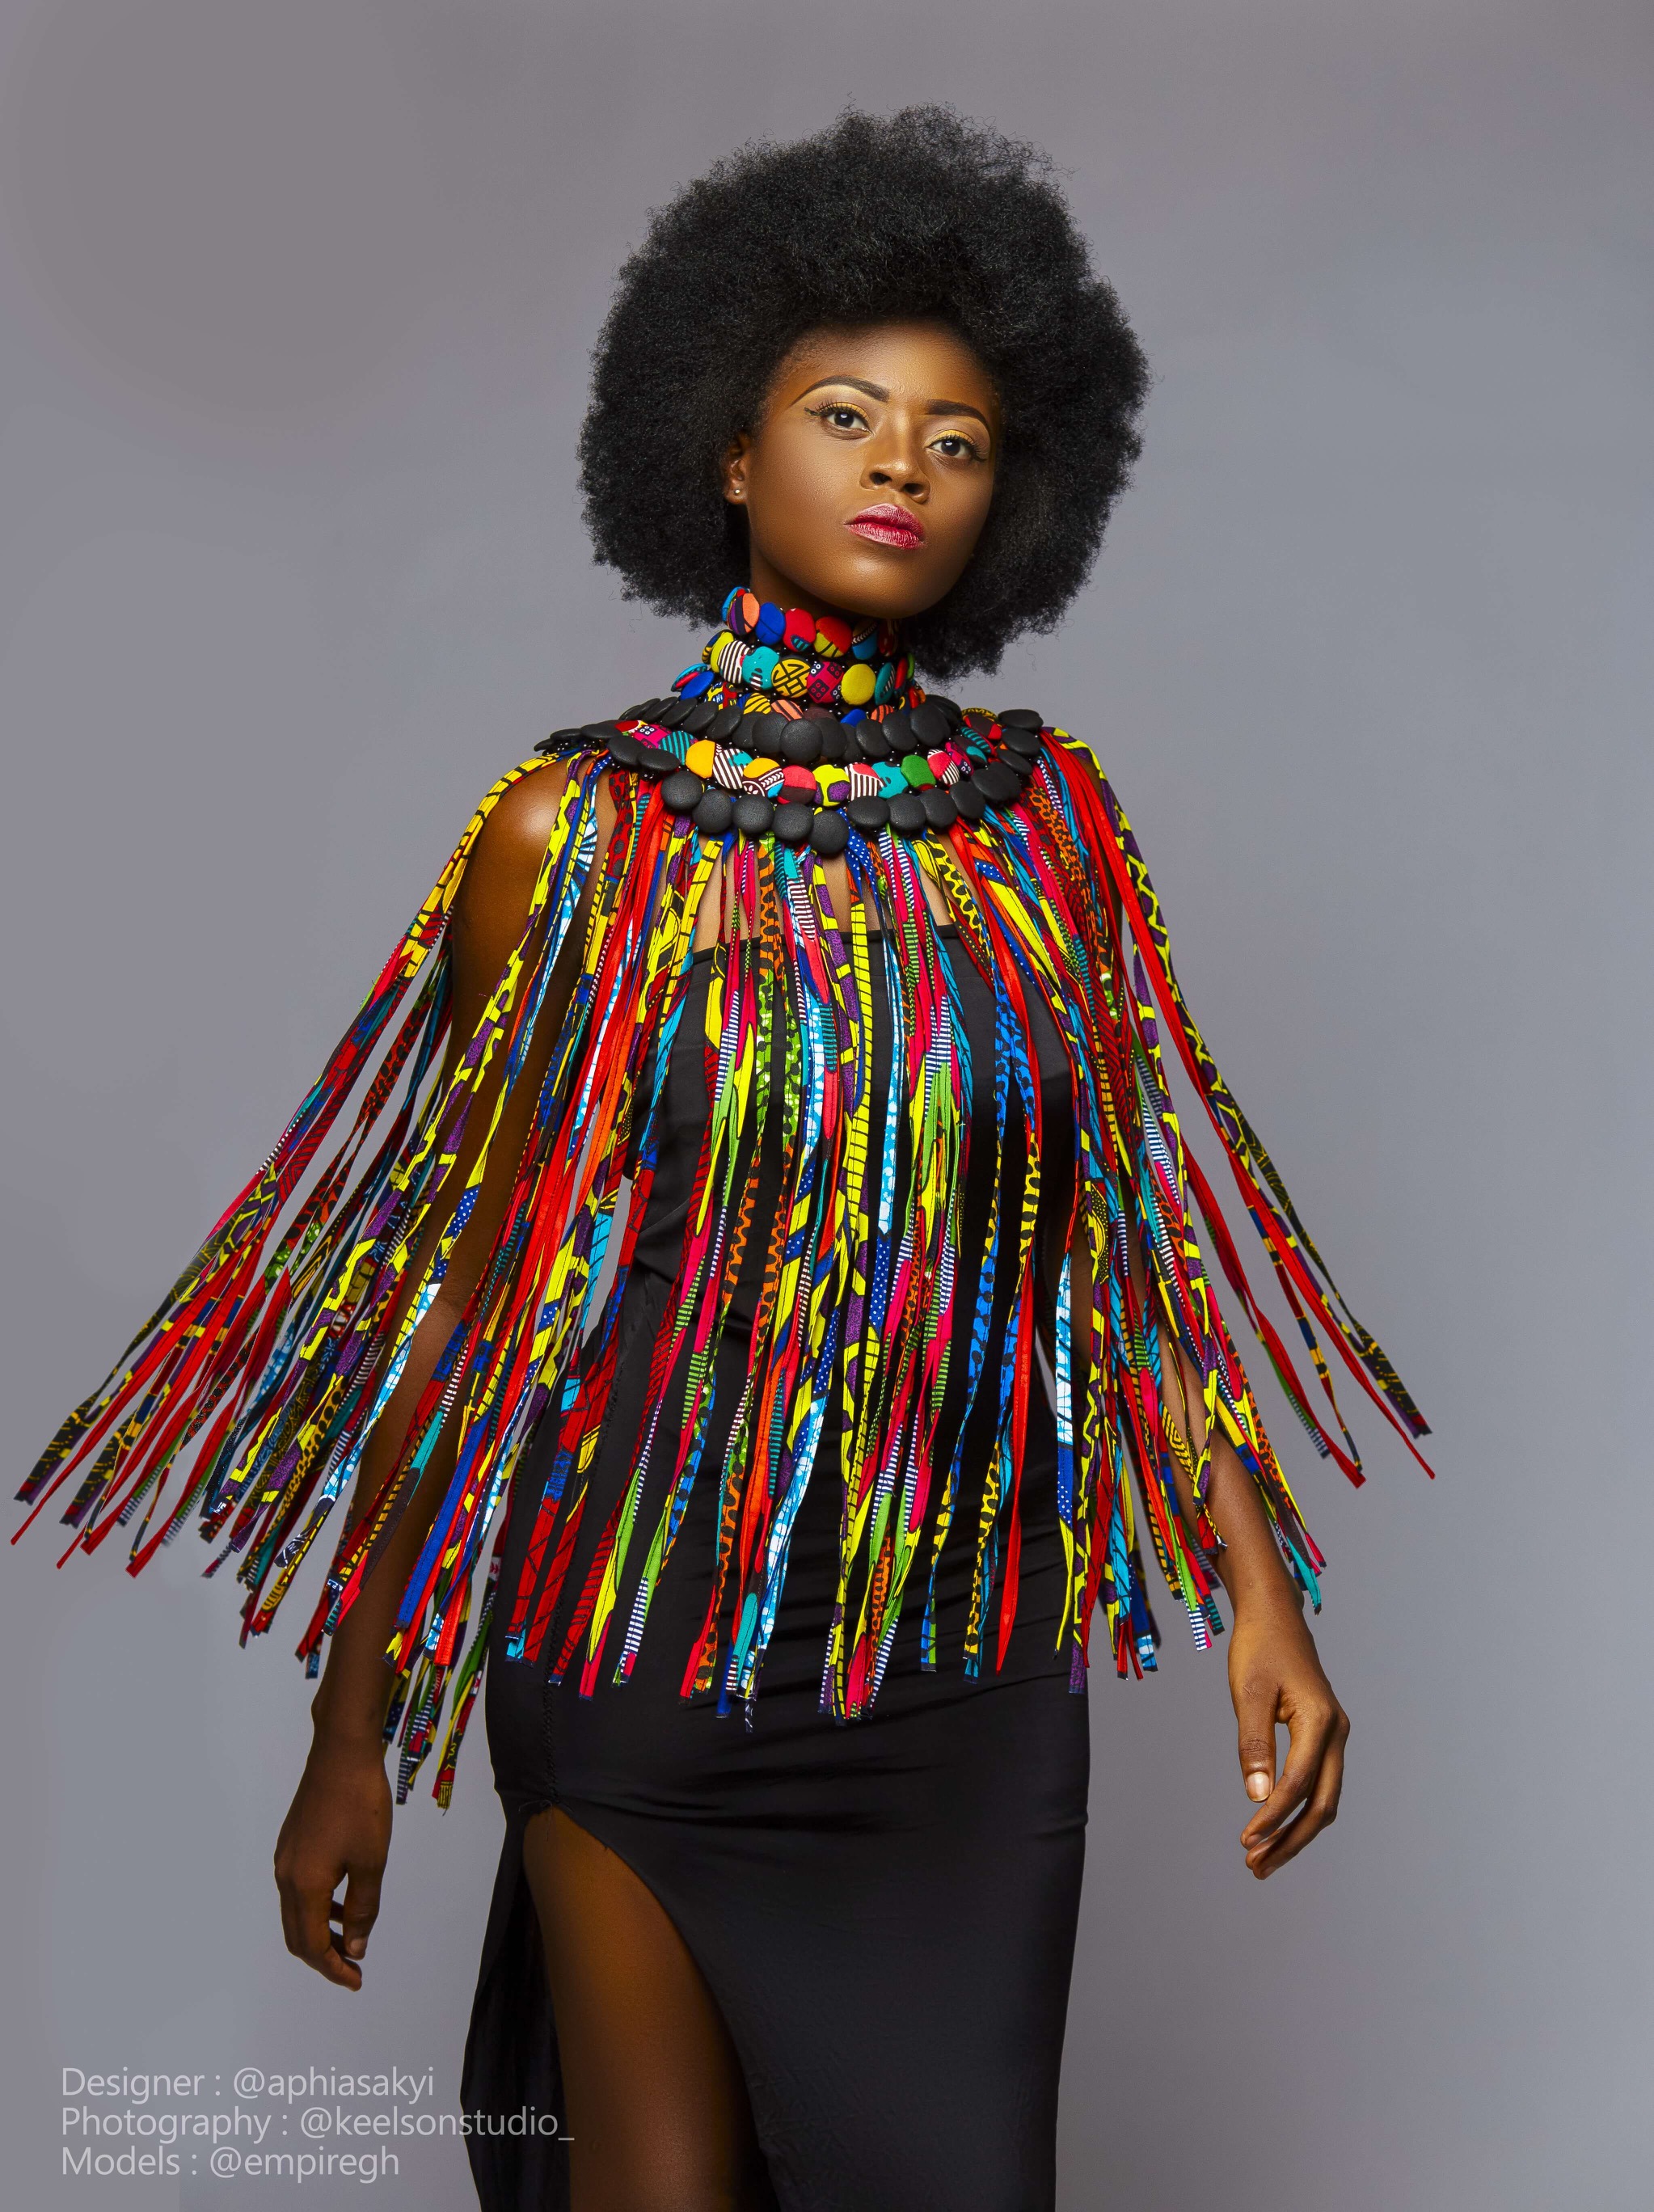 ghanaian-accessories-brand-aphia-sakyi-new-collection-is-intricately-afrocentric